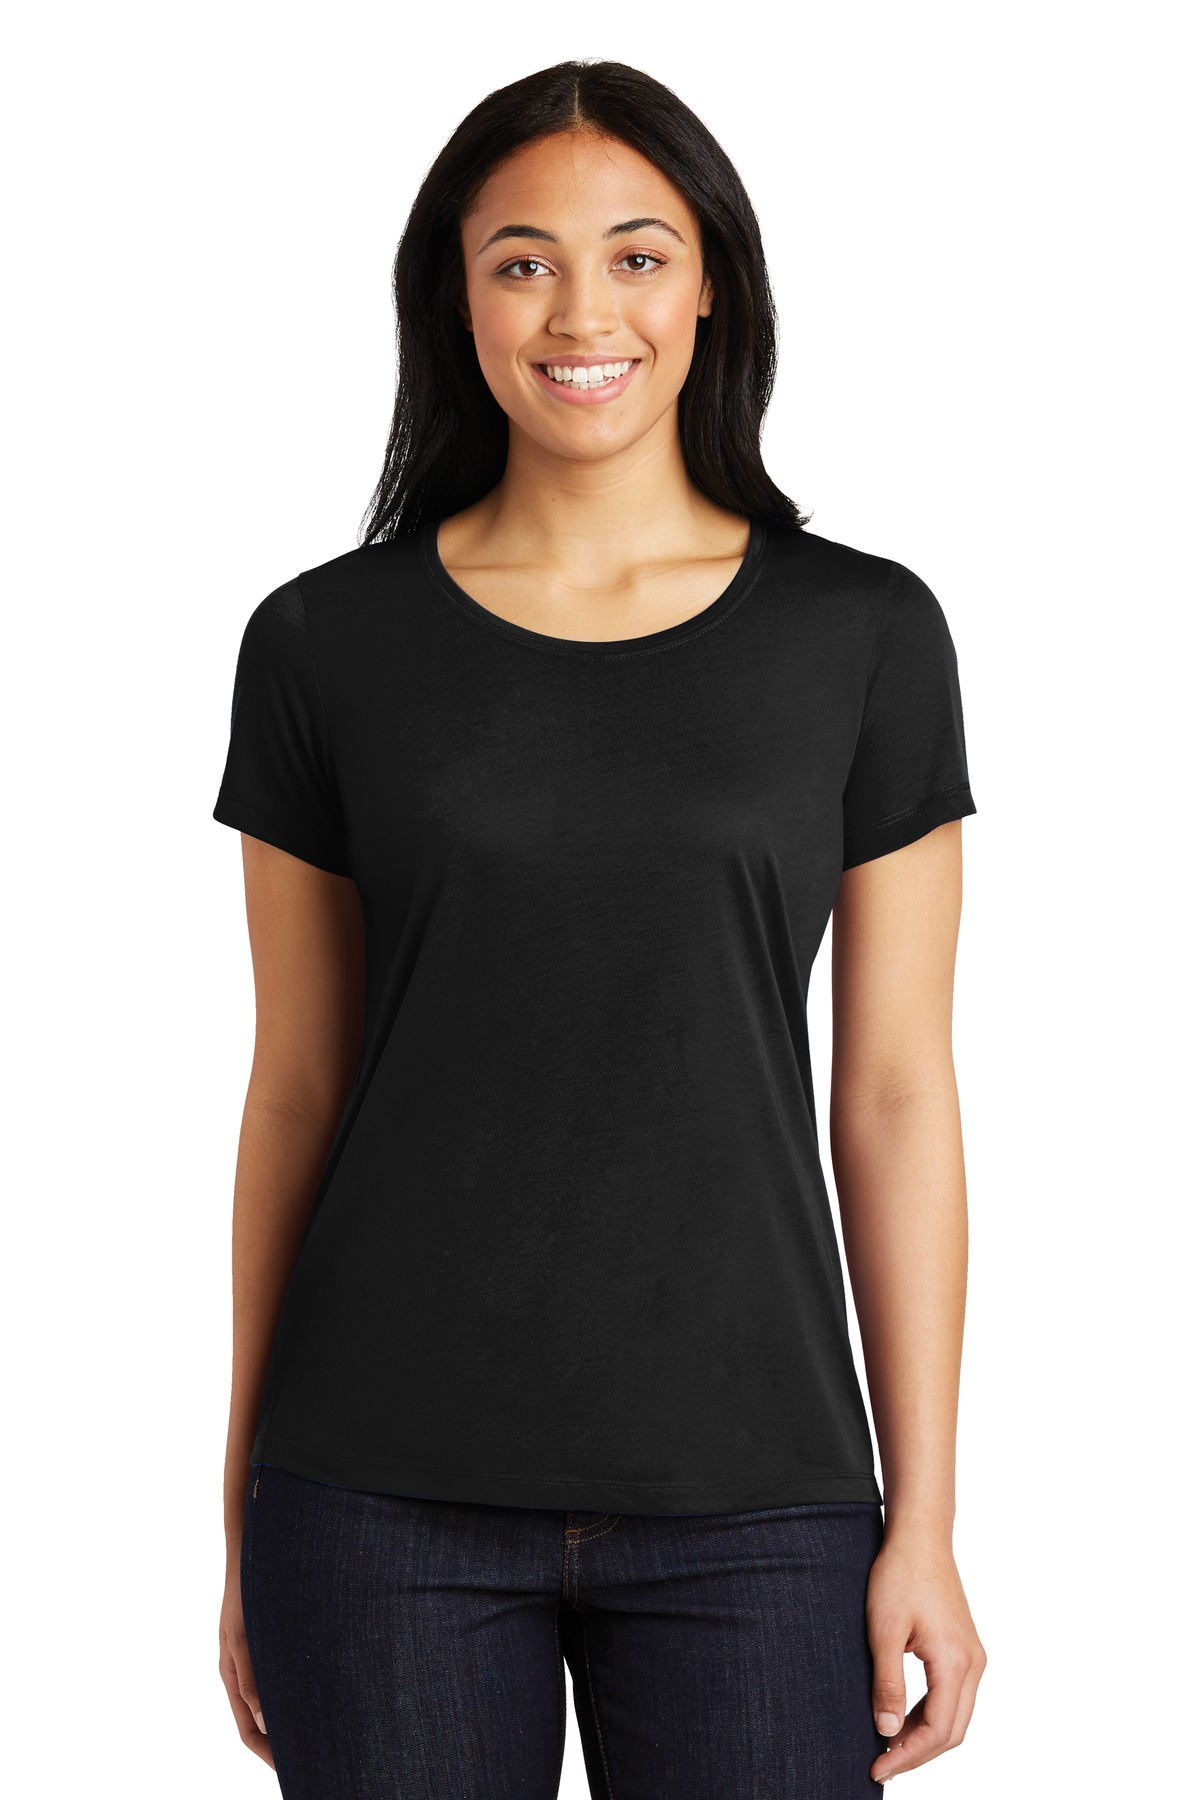 Sport-Tek Ladies Hospitality T-Shirts ® Ladies PosiCharge® Competitor Cotton Touch Scoop Neck Tee.-Sport-Tek